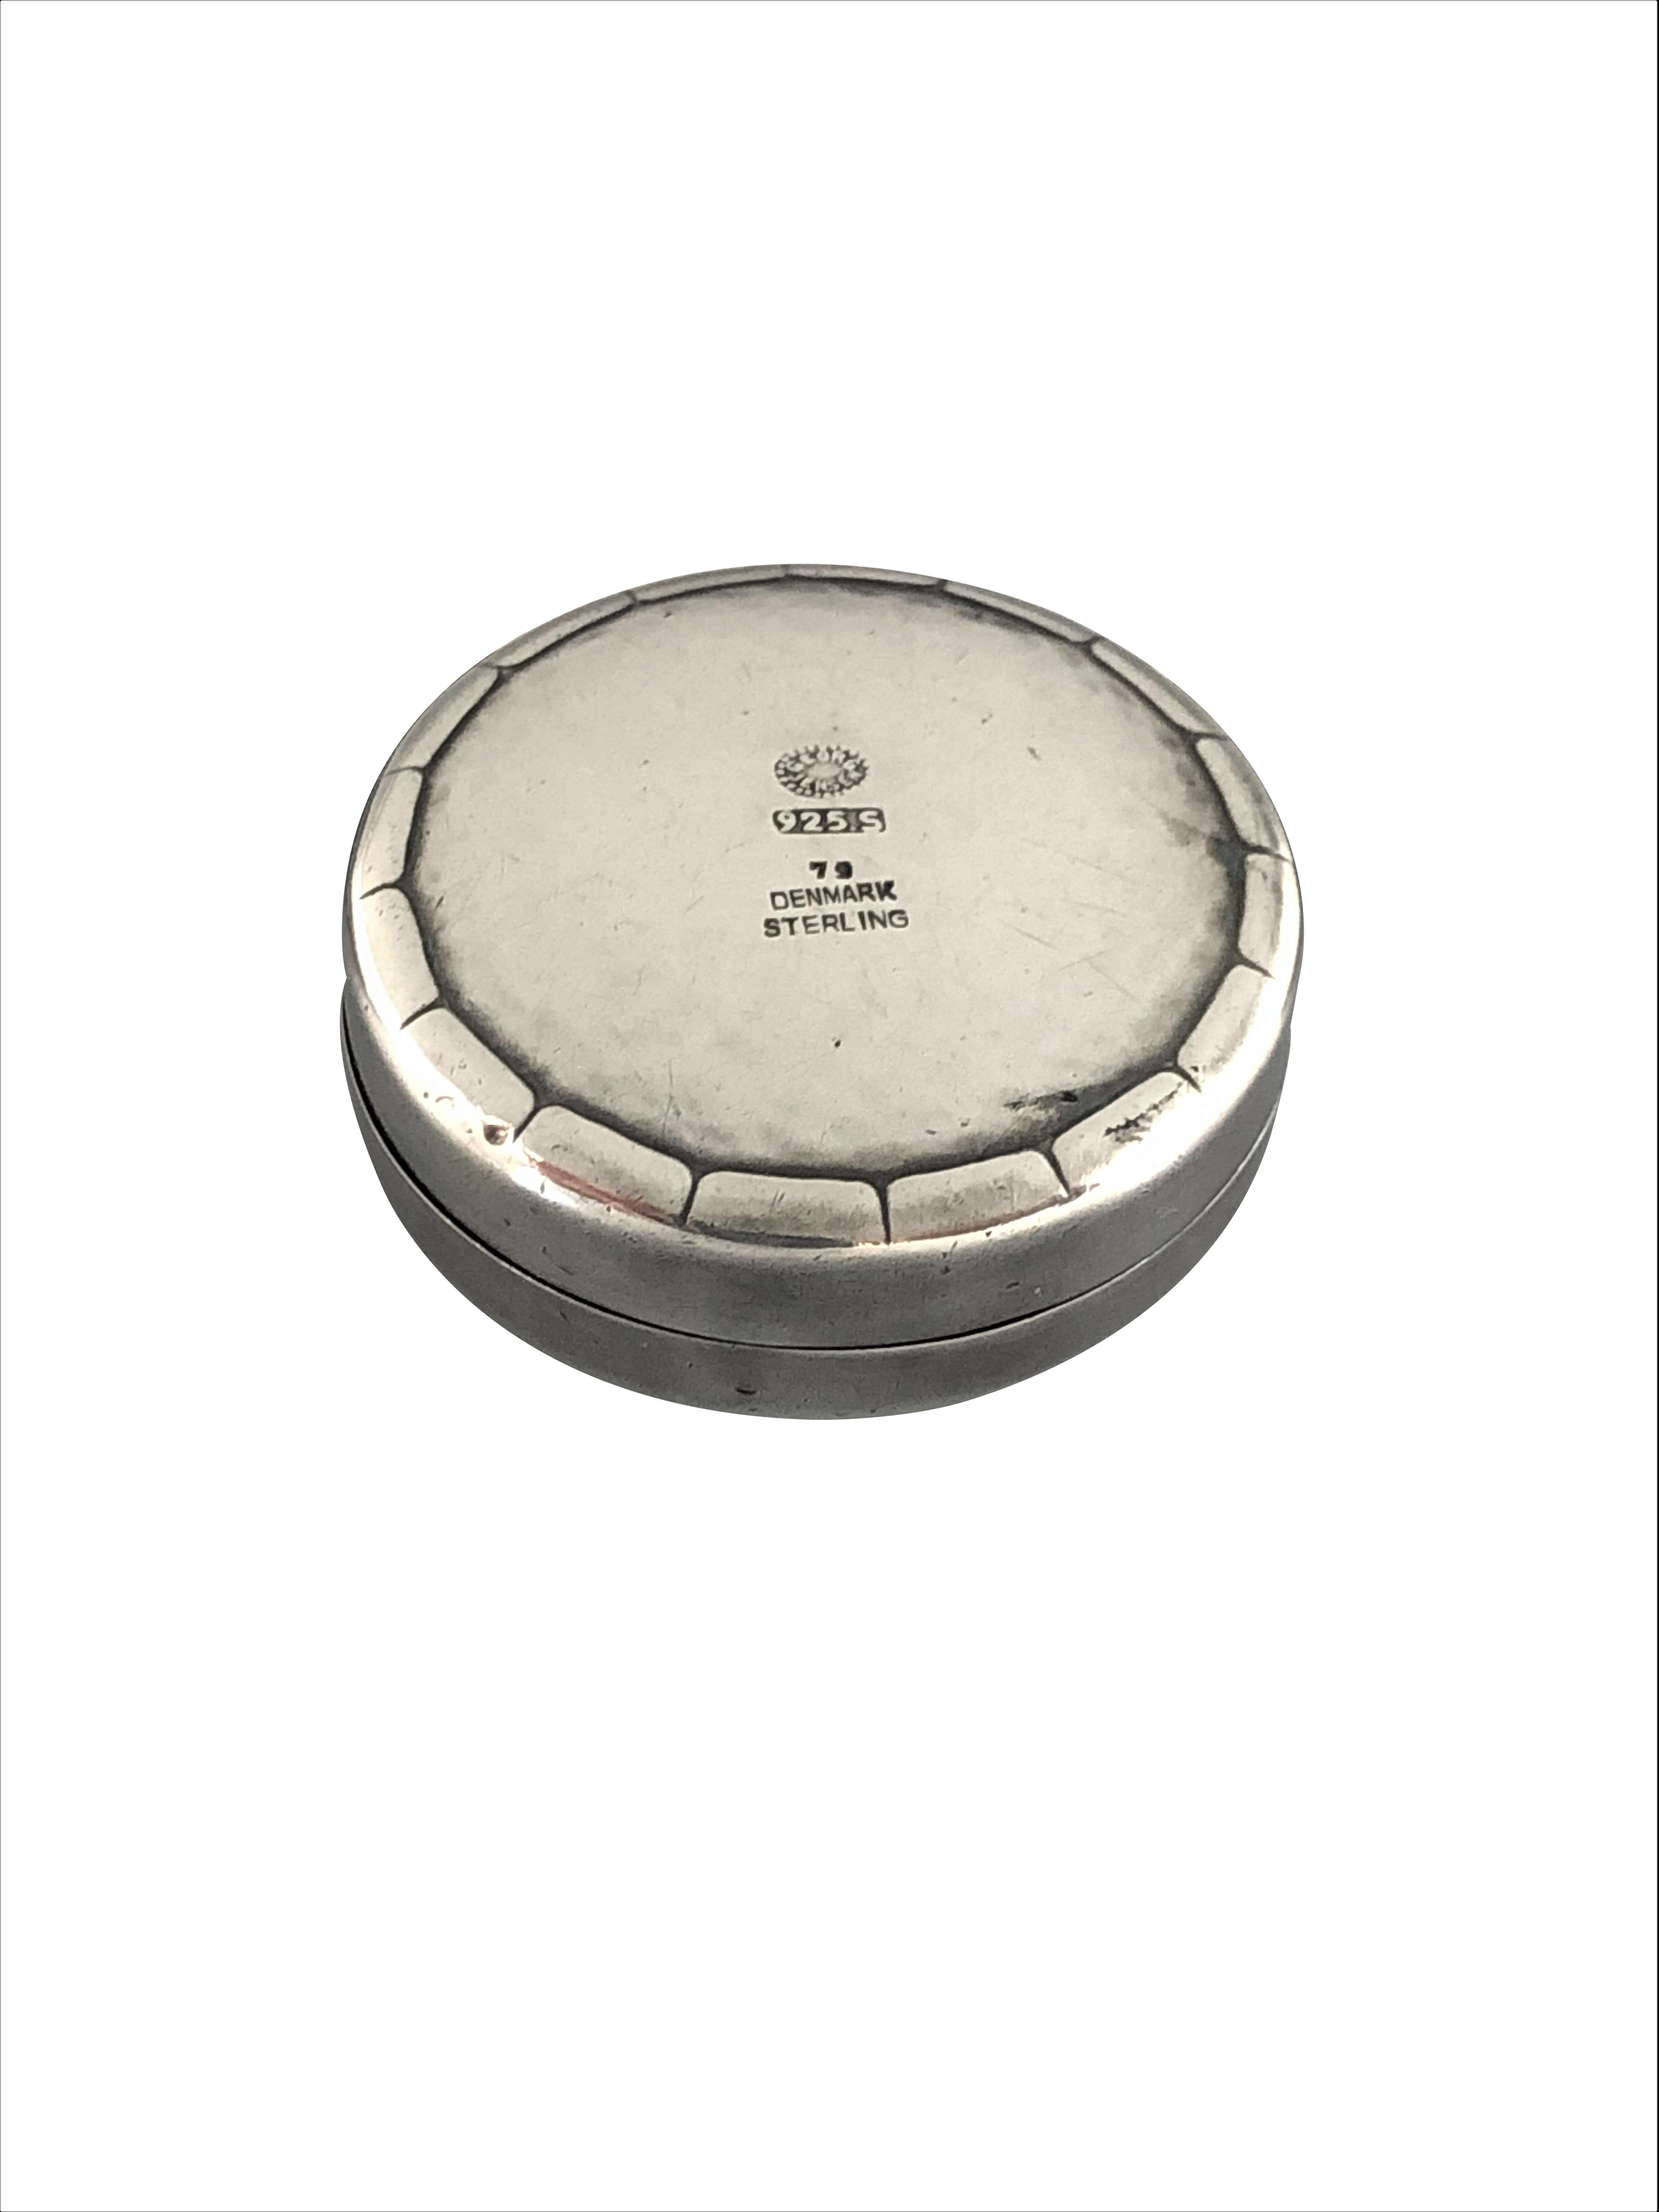 Circa 1920 - 1930 Georg Jensen #79 Sterling Silver hand Hammered Pill Box, measuring 1 3/16 inches in Diameter X 1/2 inch. Excellent near unused condition.